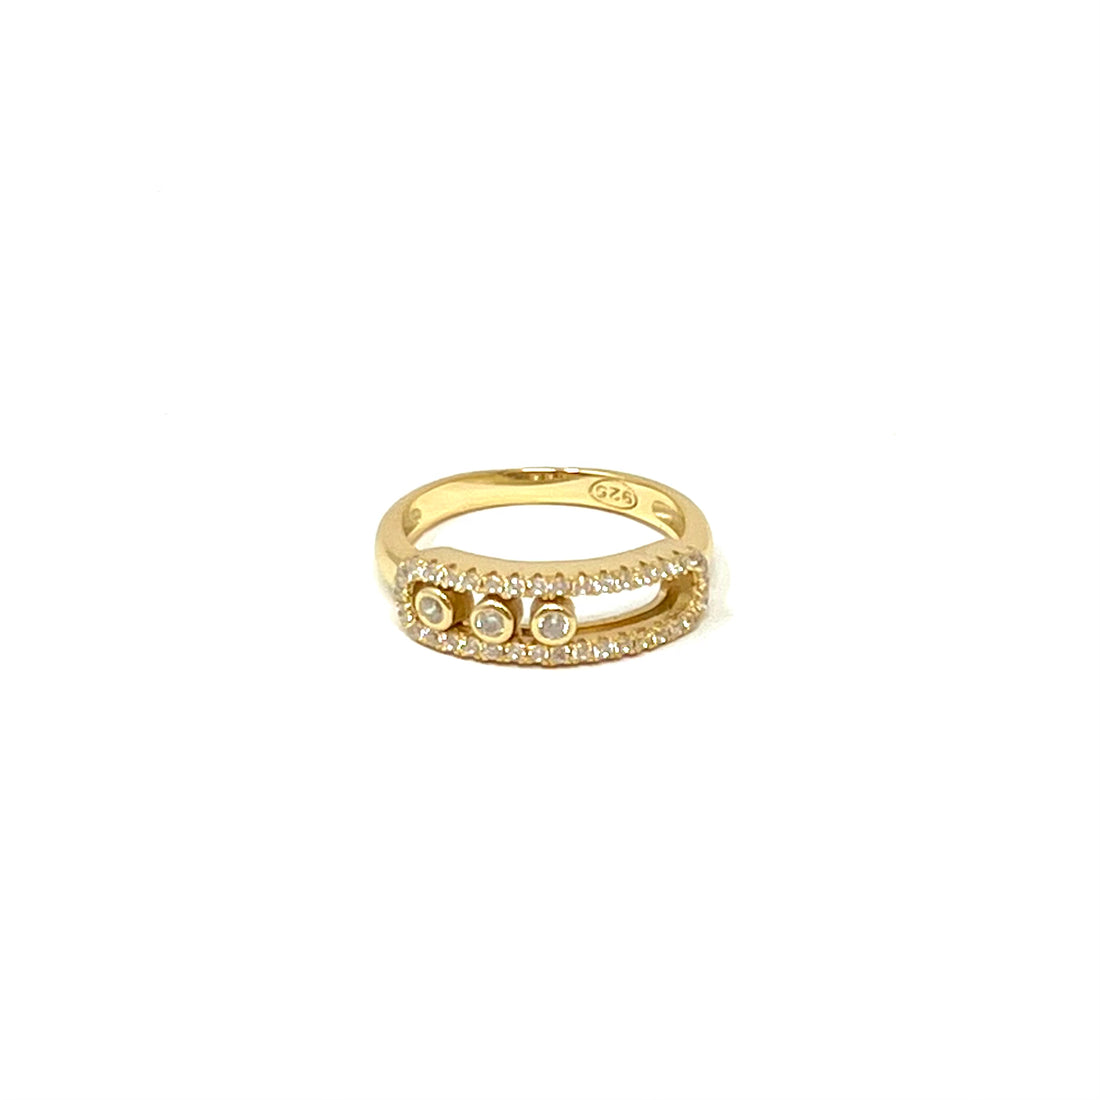 Slider Pinky Ring in Gold